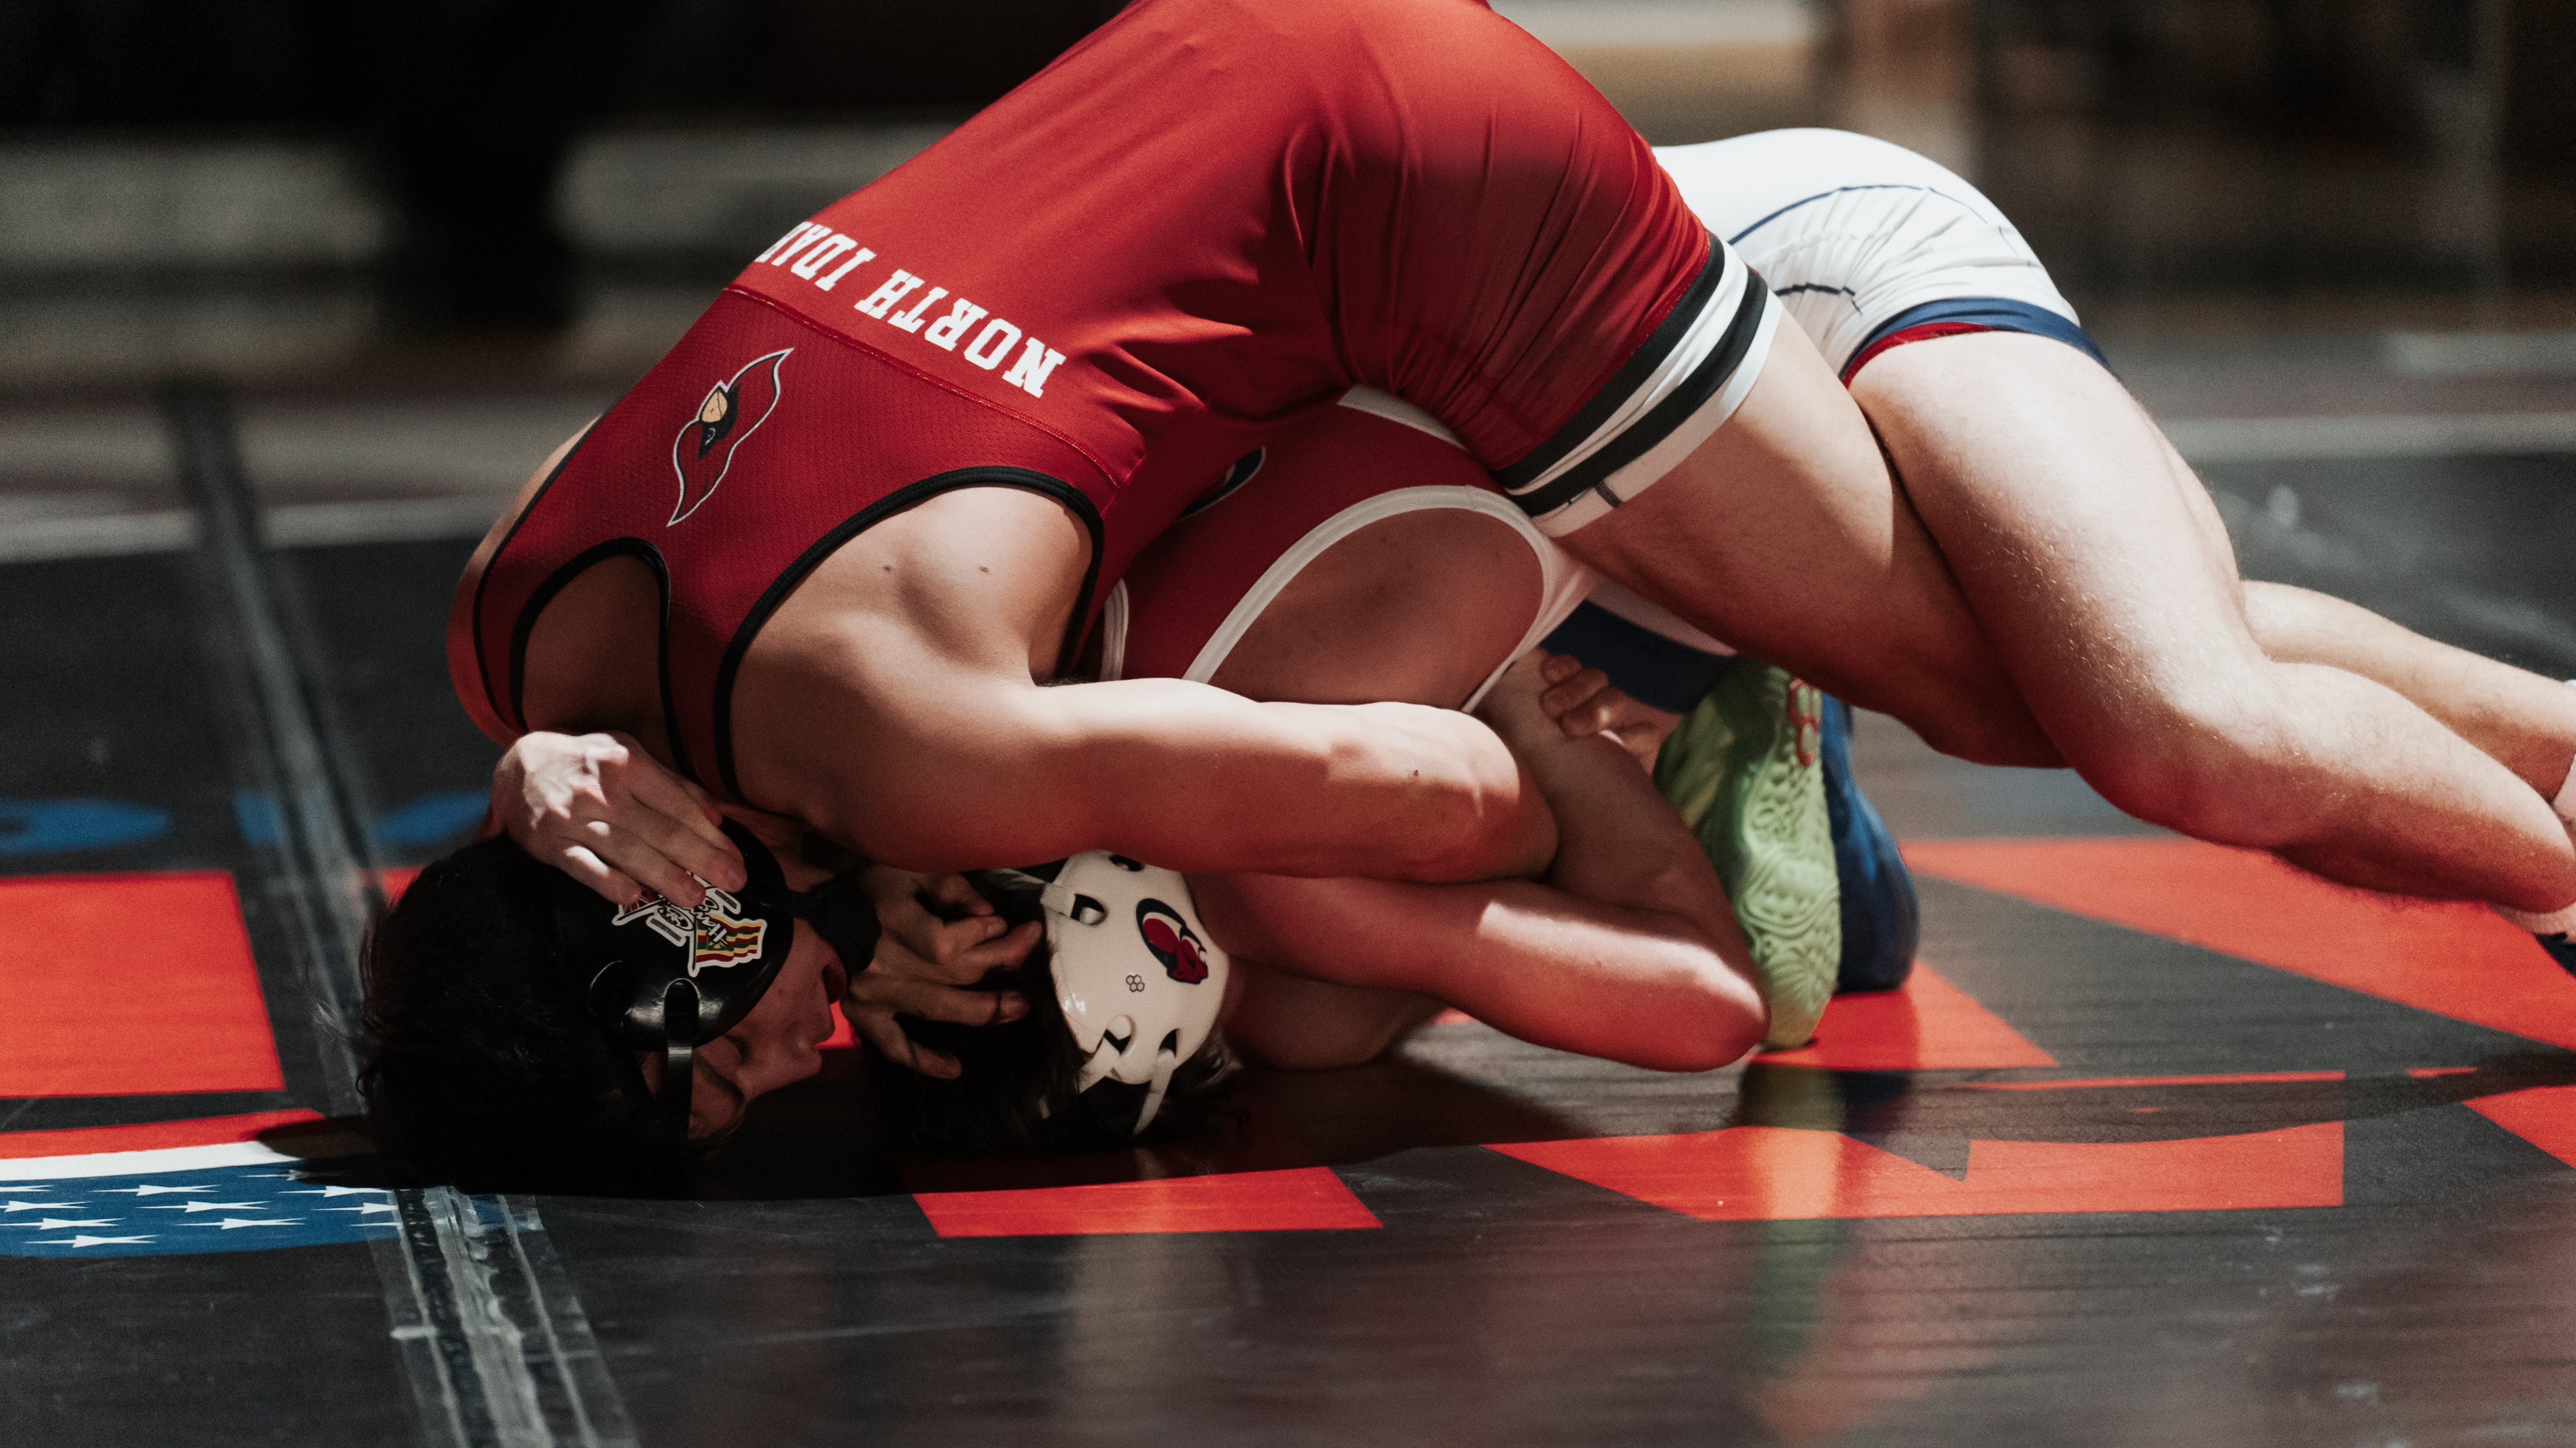 Wrestling Team member competing with opponent on the floor